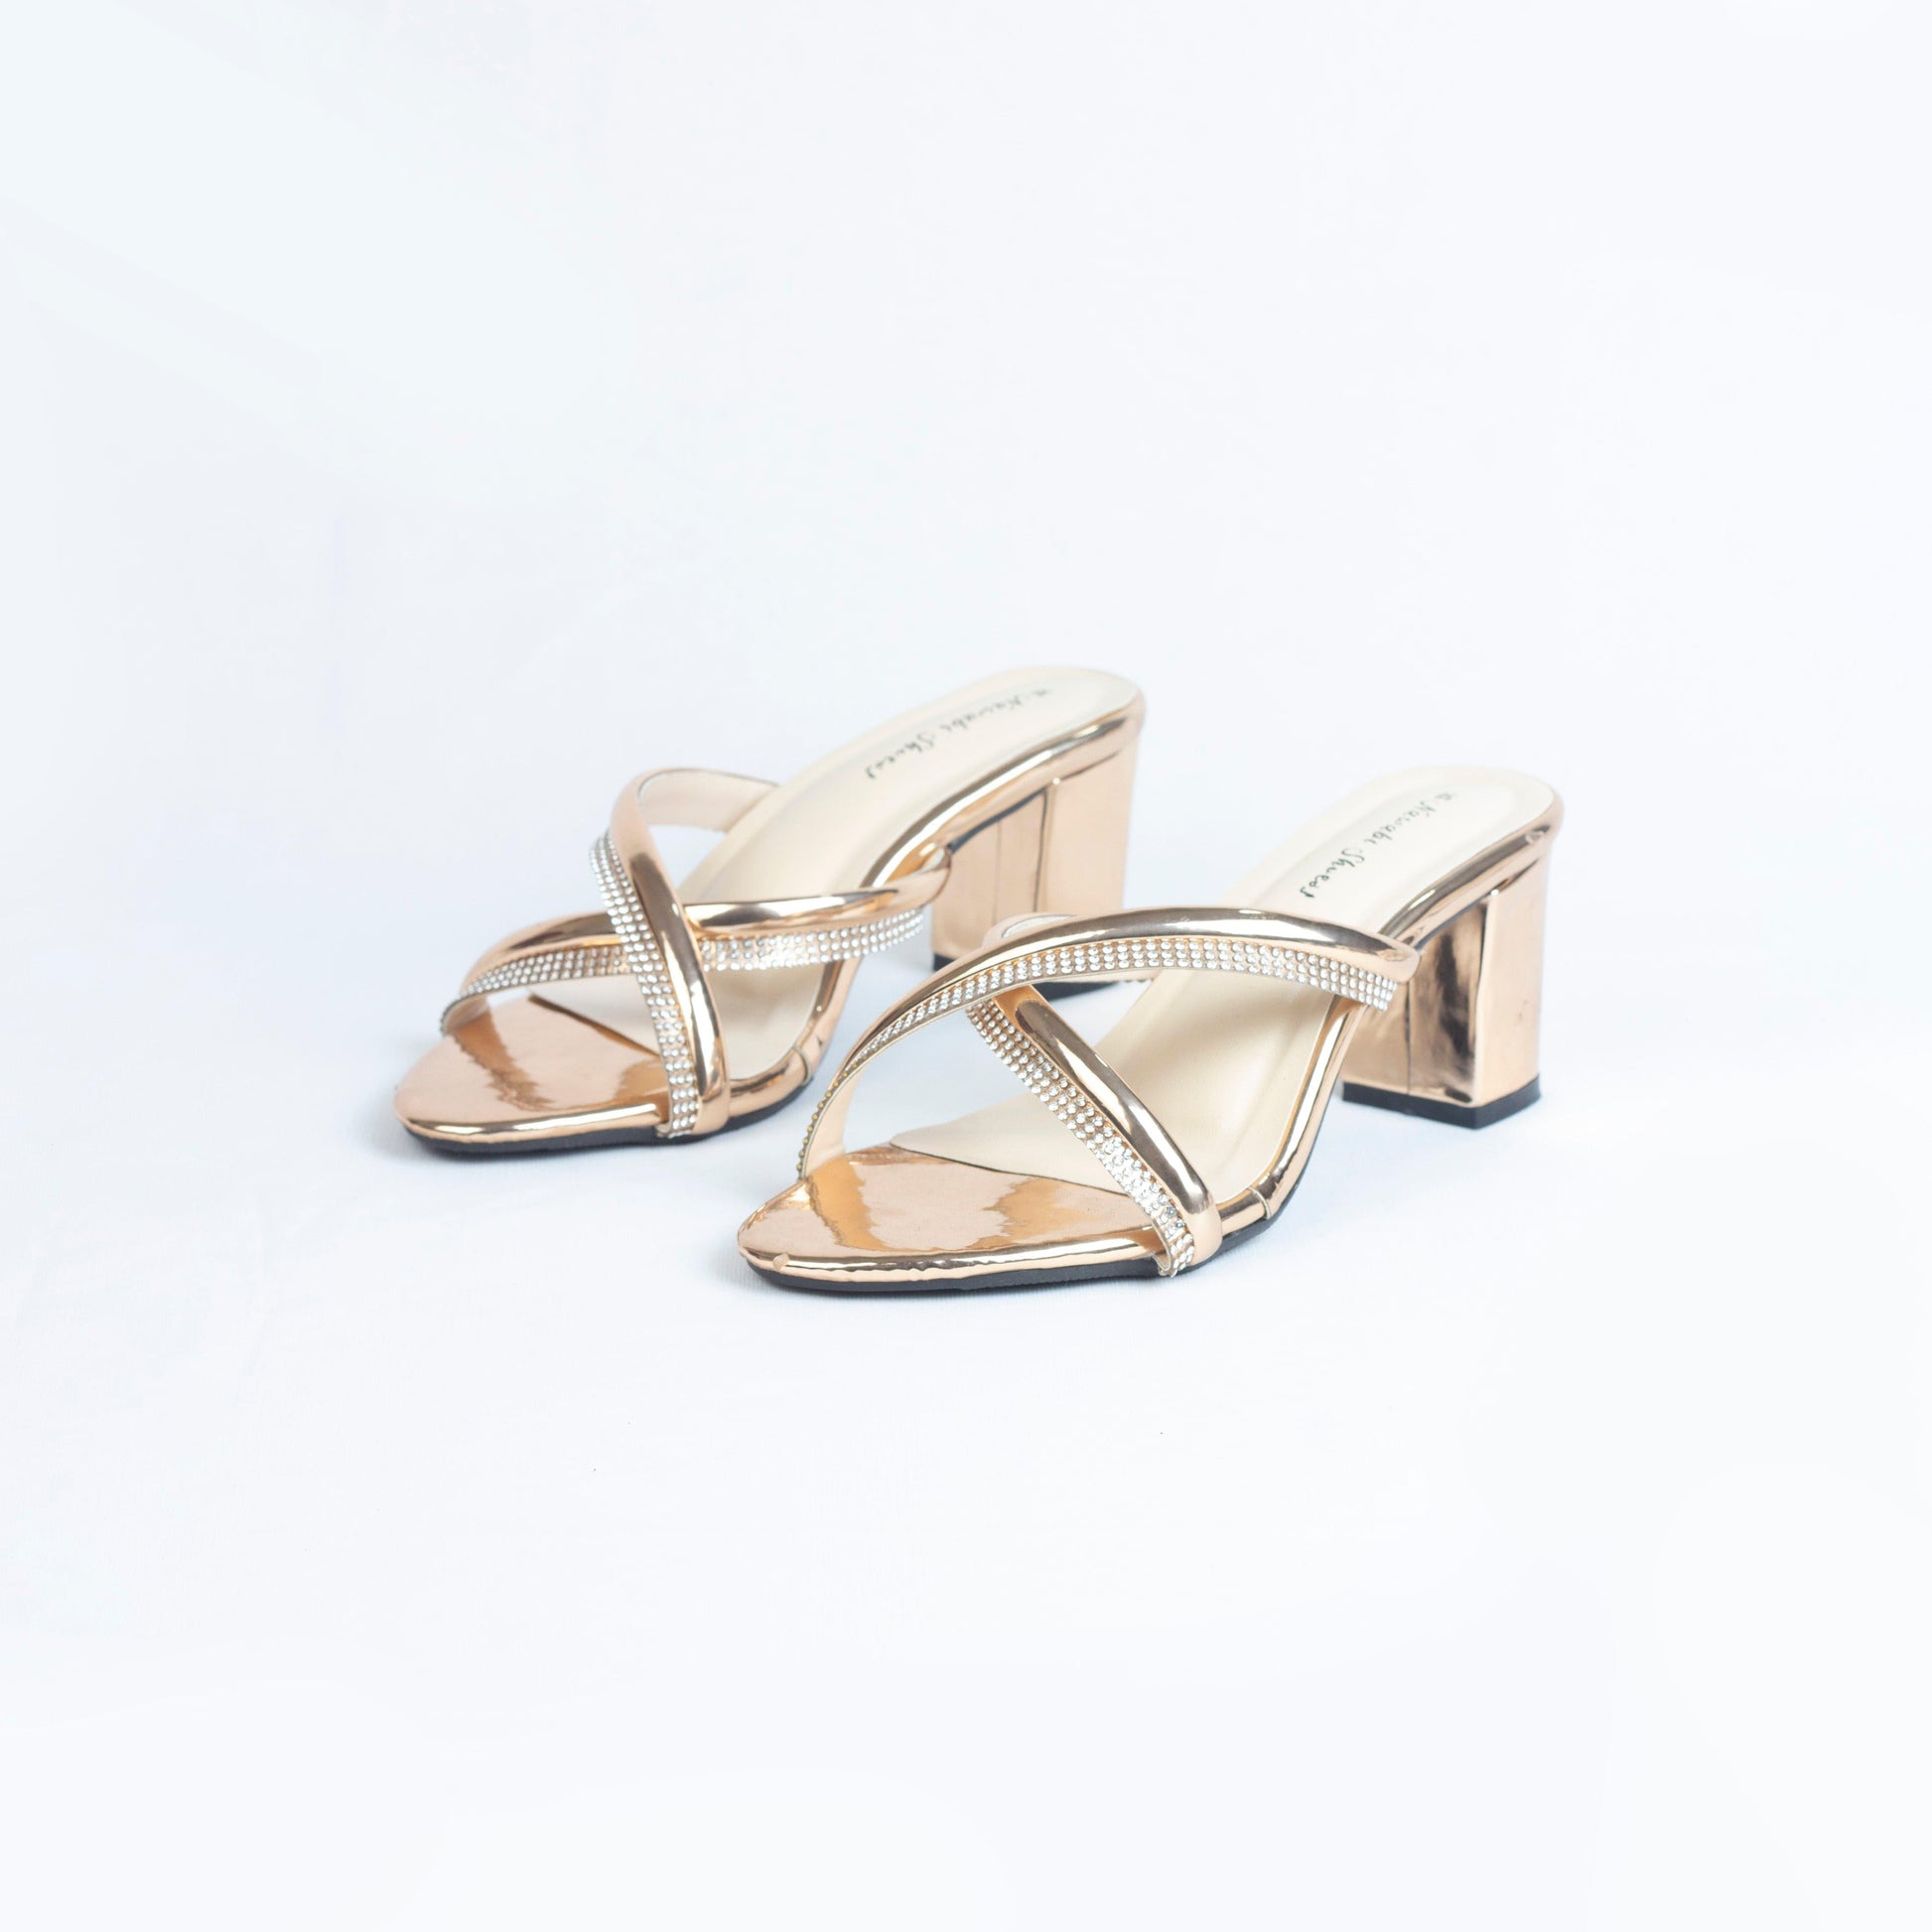 Nawabi Shoes BD Shoes 35 / Rose Gold Heels Block for Women: The Must-Have for Your Shoe Collection